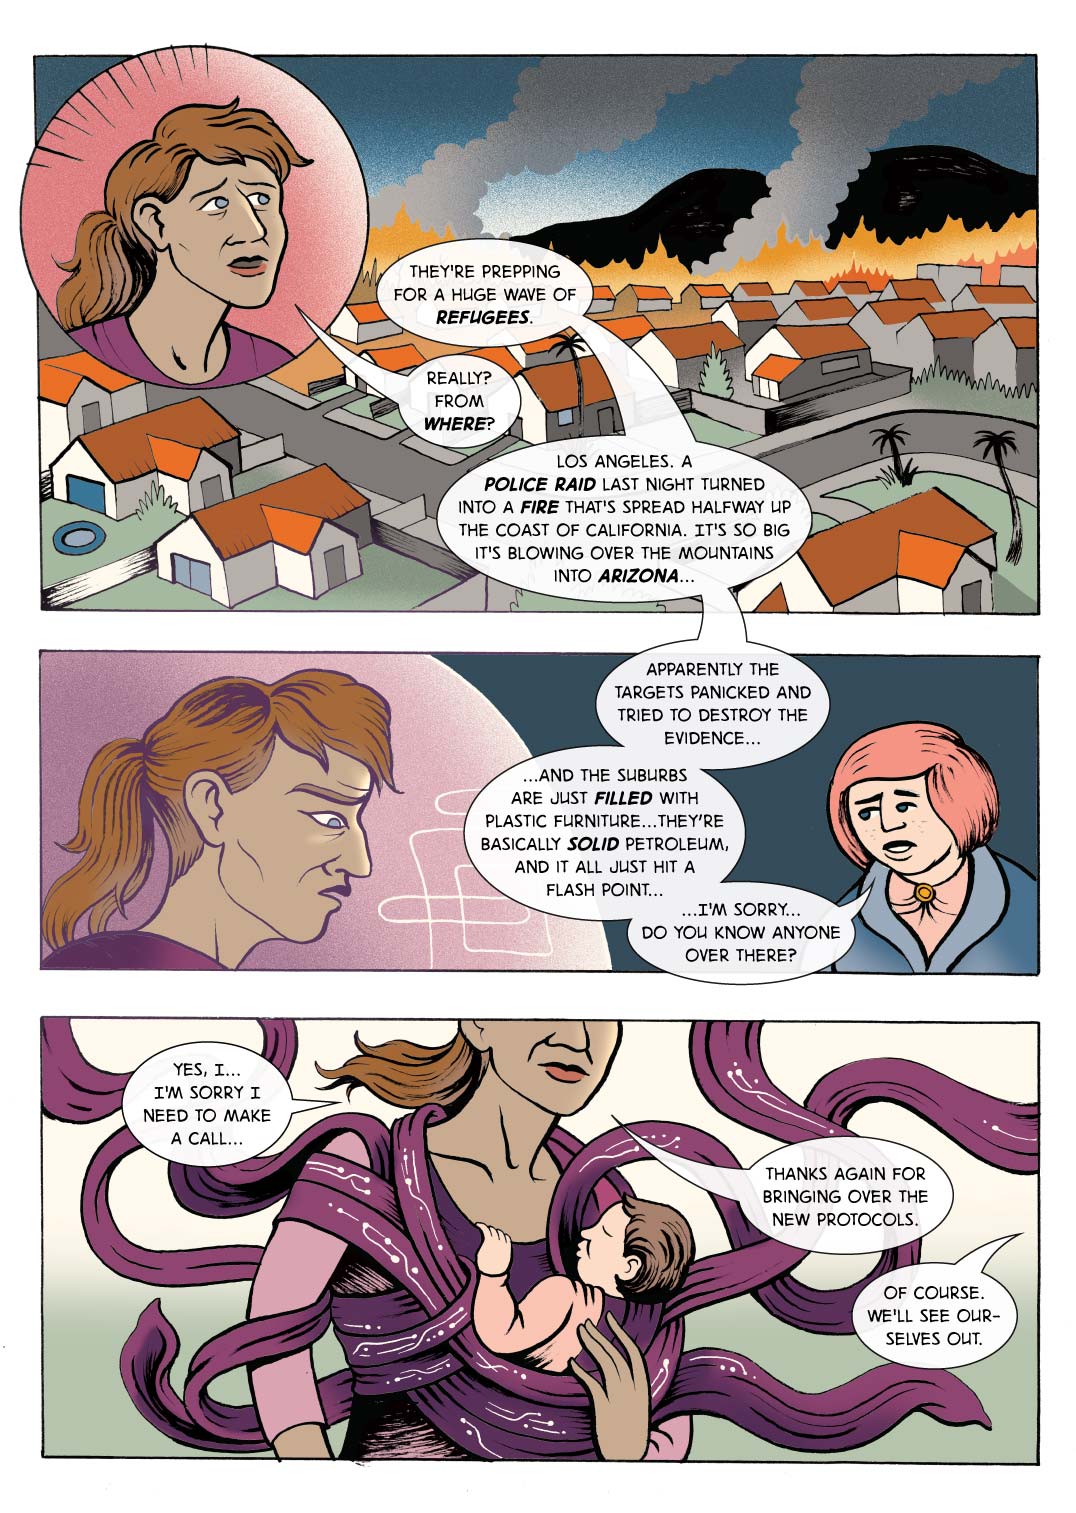 Chapter 1, page 11